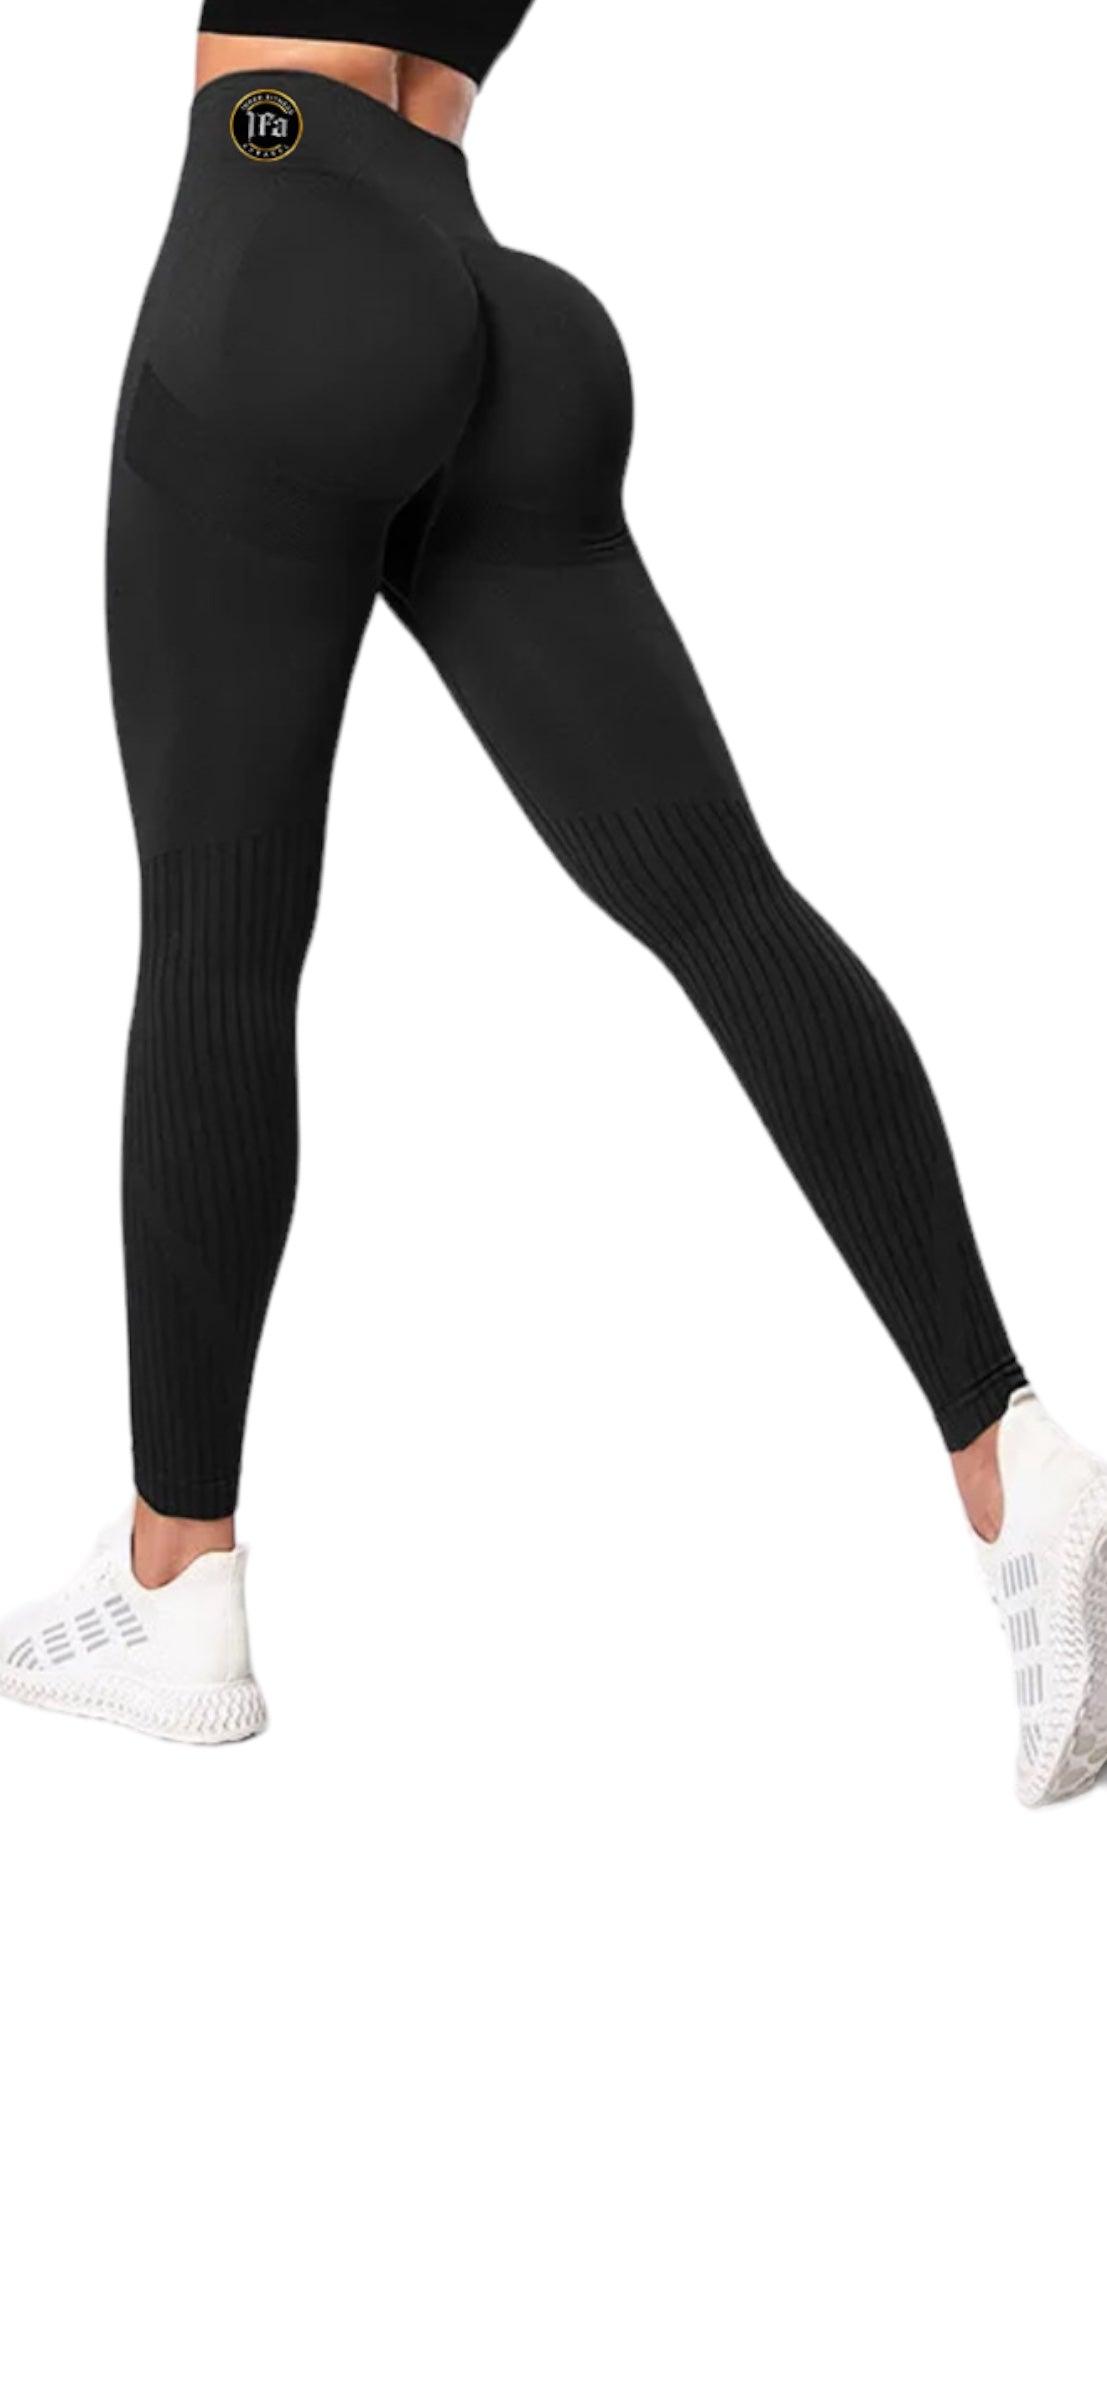 High waisted leggings with pockets – Inked Fitness Apparel